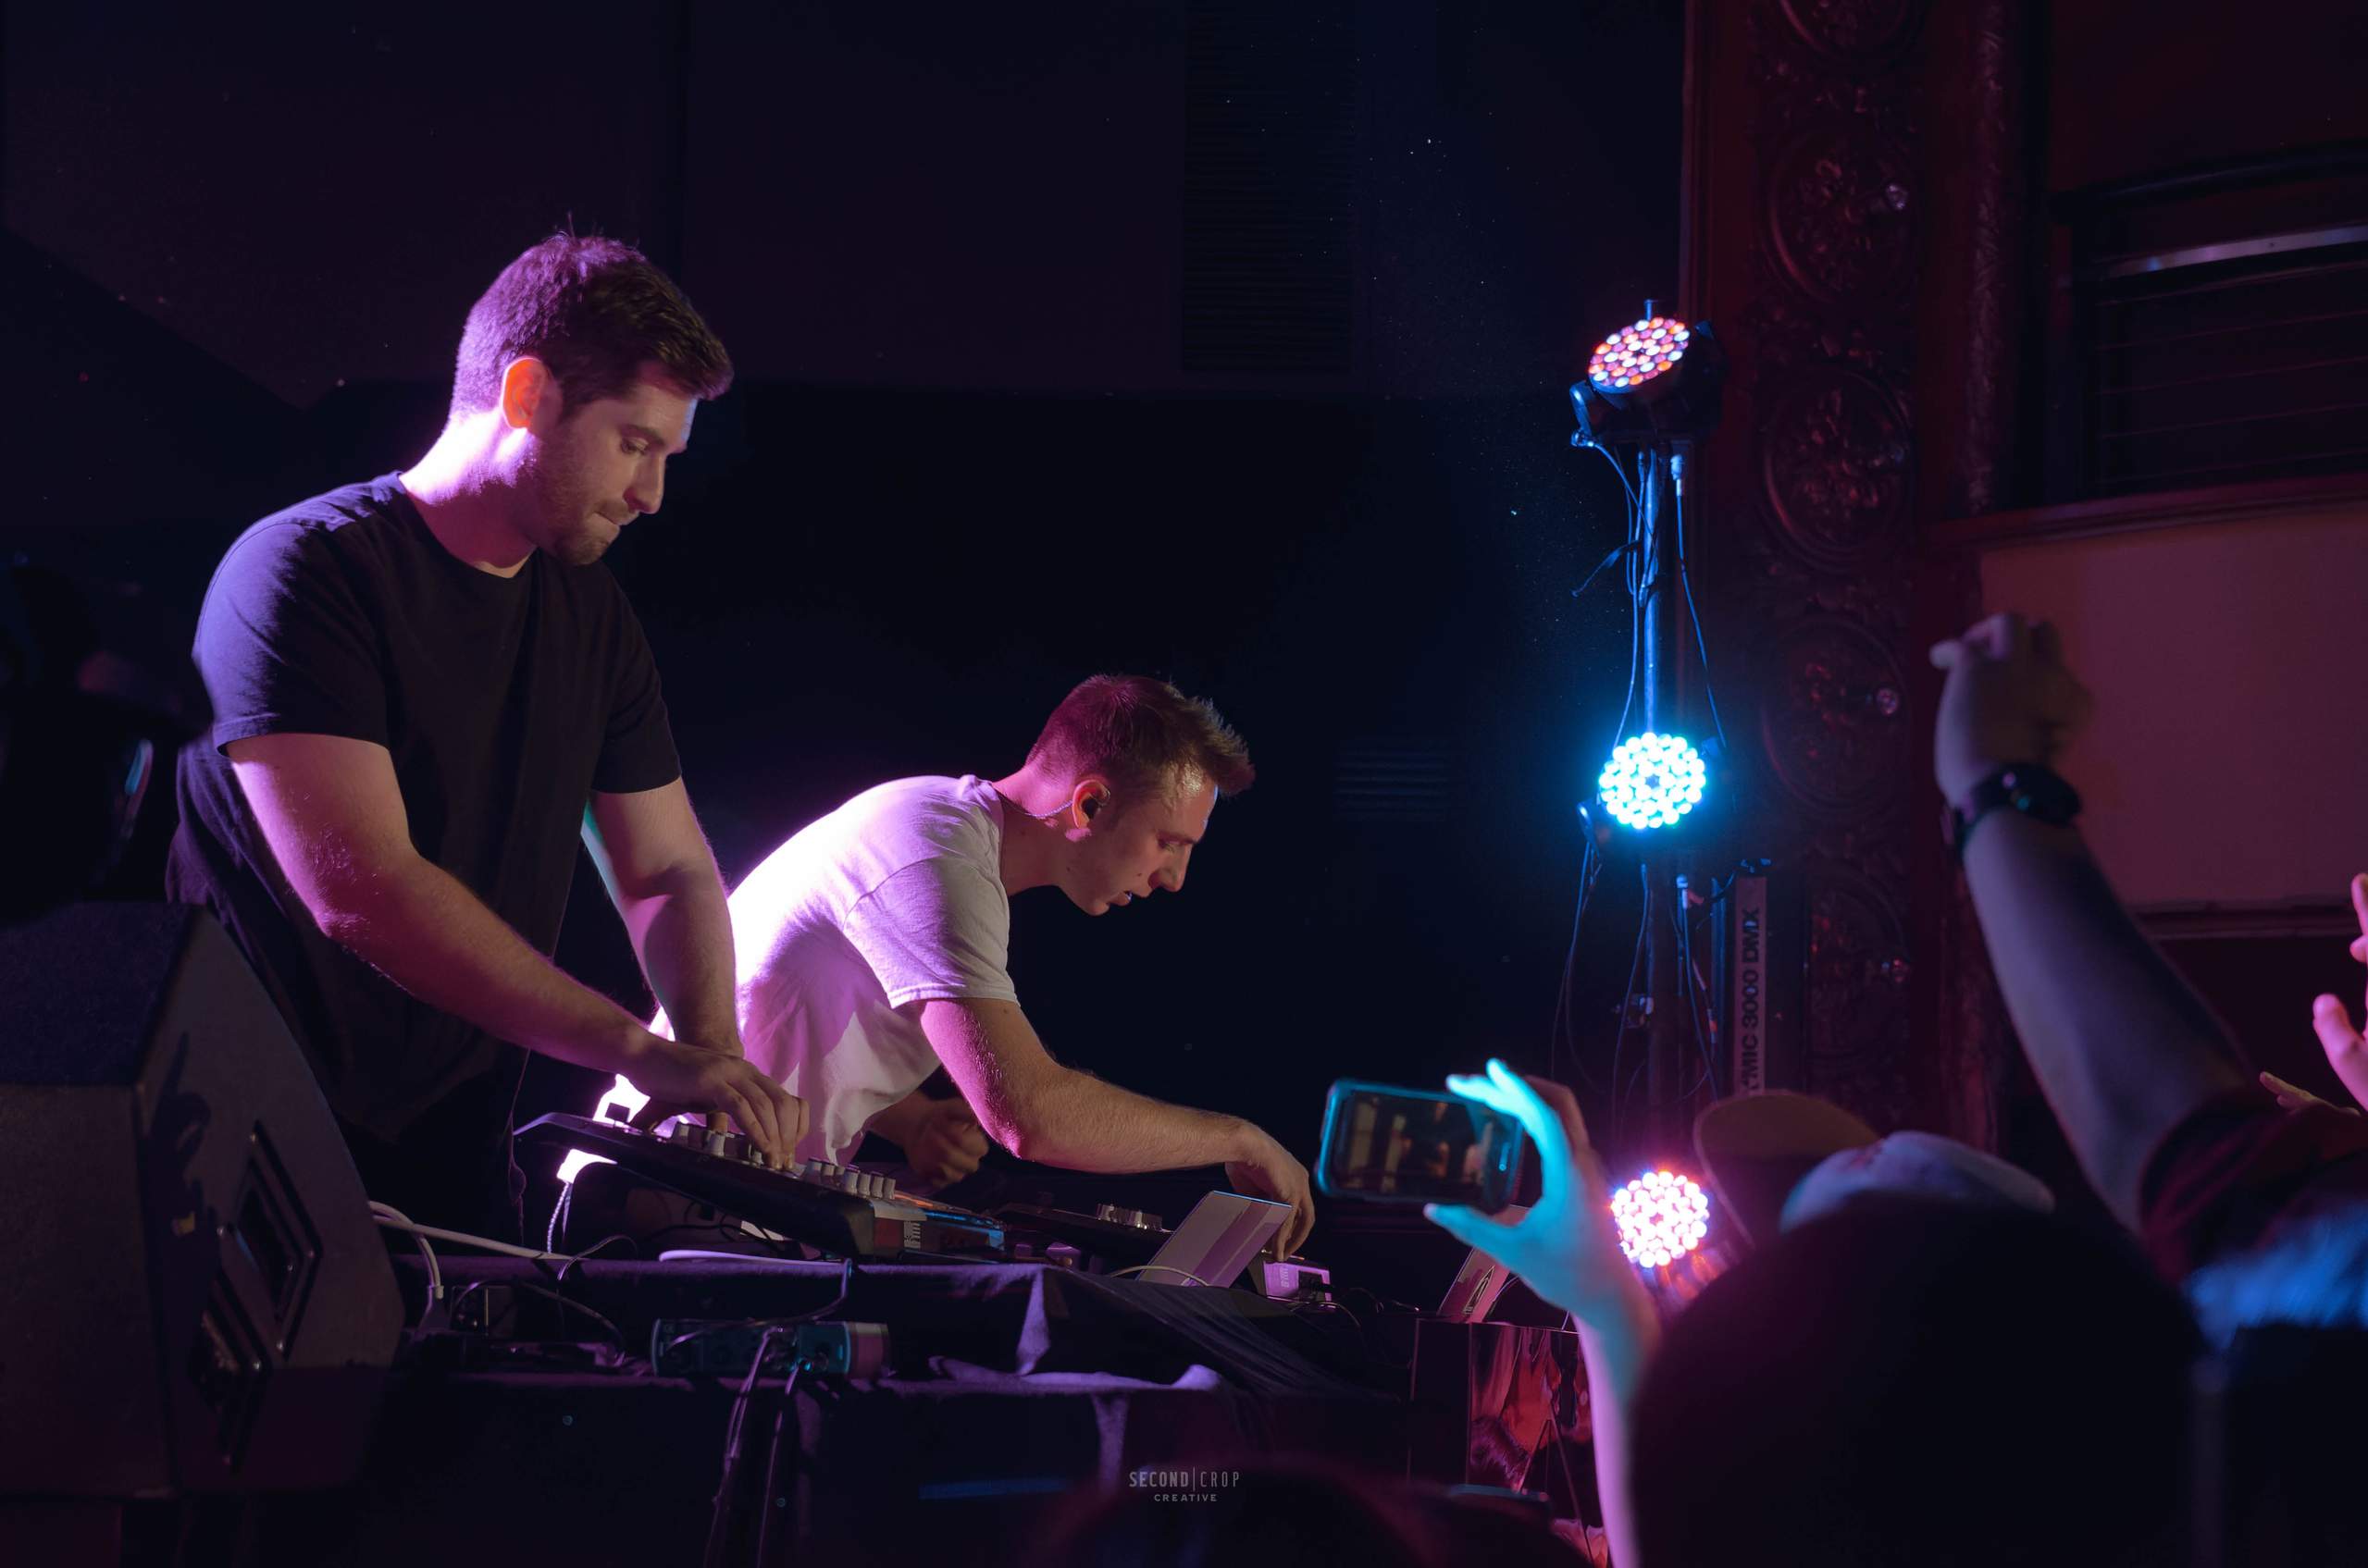 Odesza performing at The Majestic in Madison, WI on October 12th, 2014, photography by Ross Harried for Second Crop Music